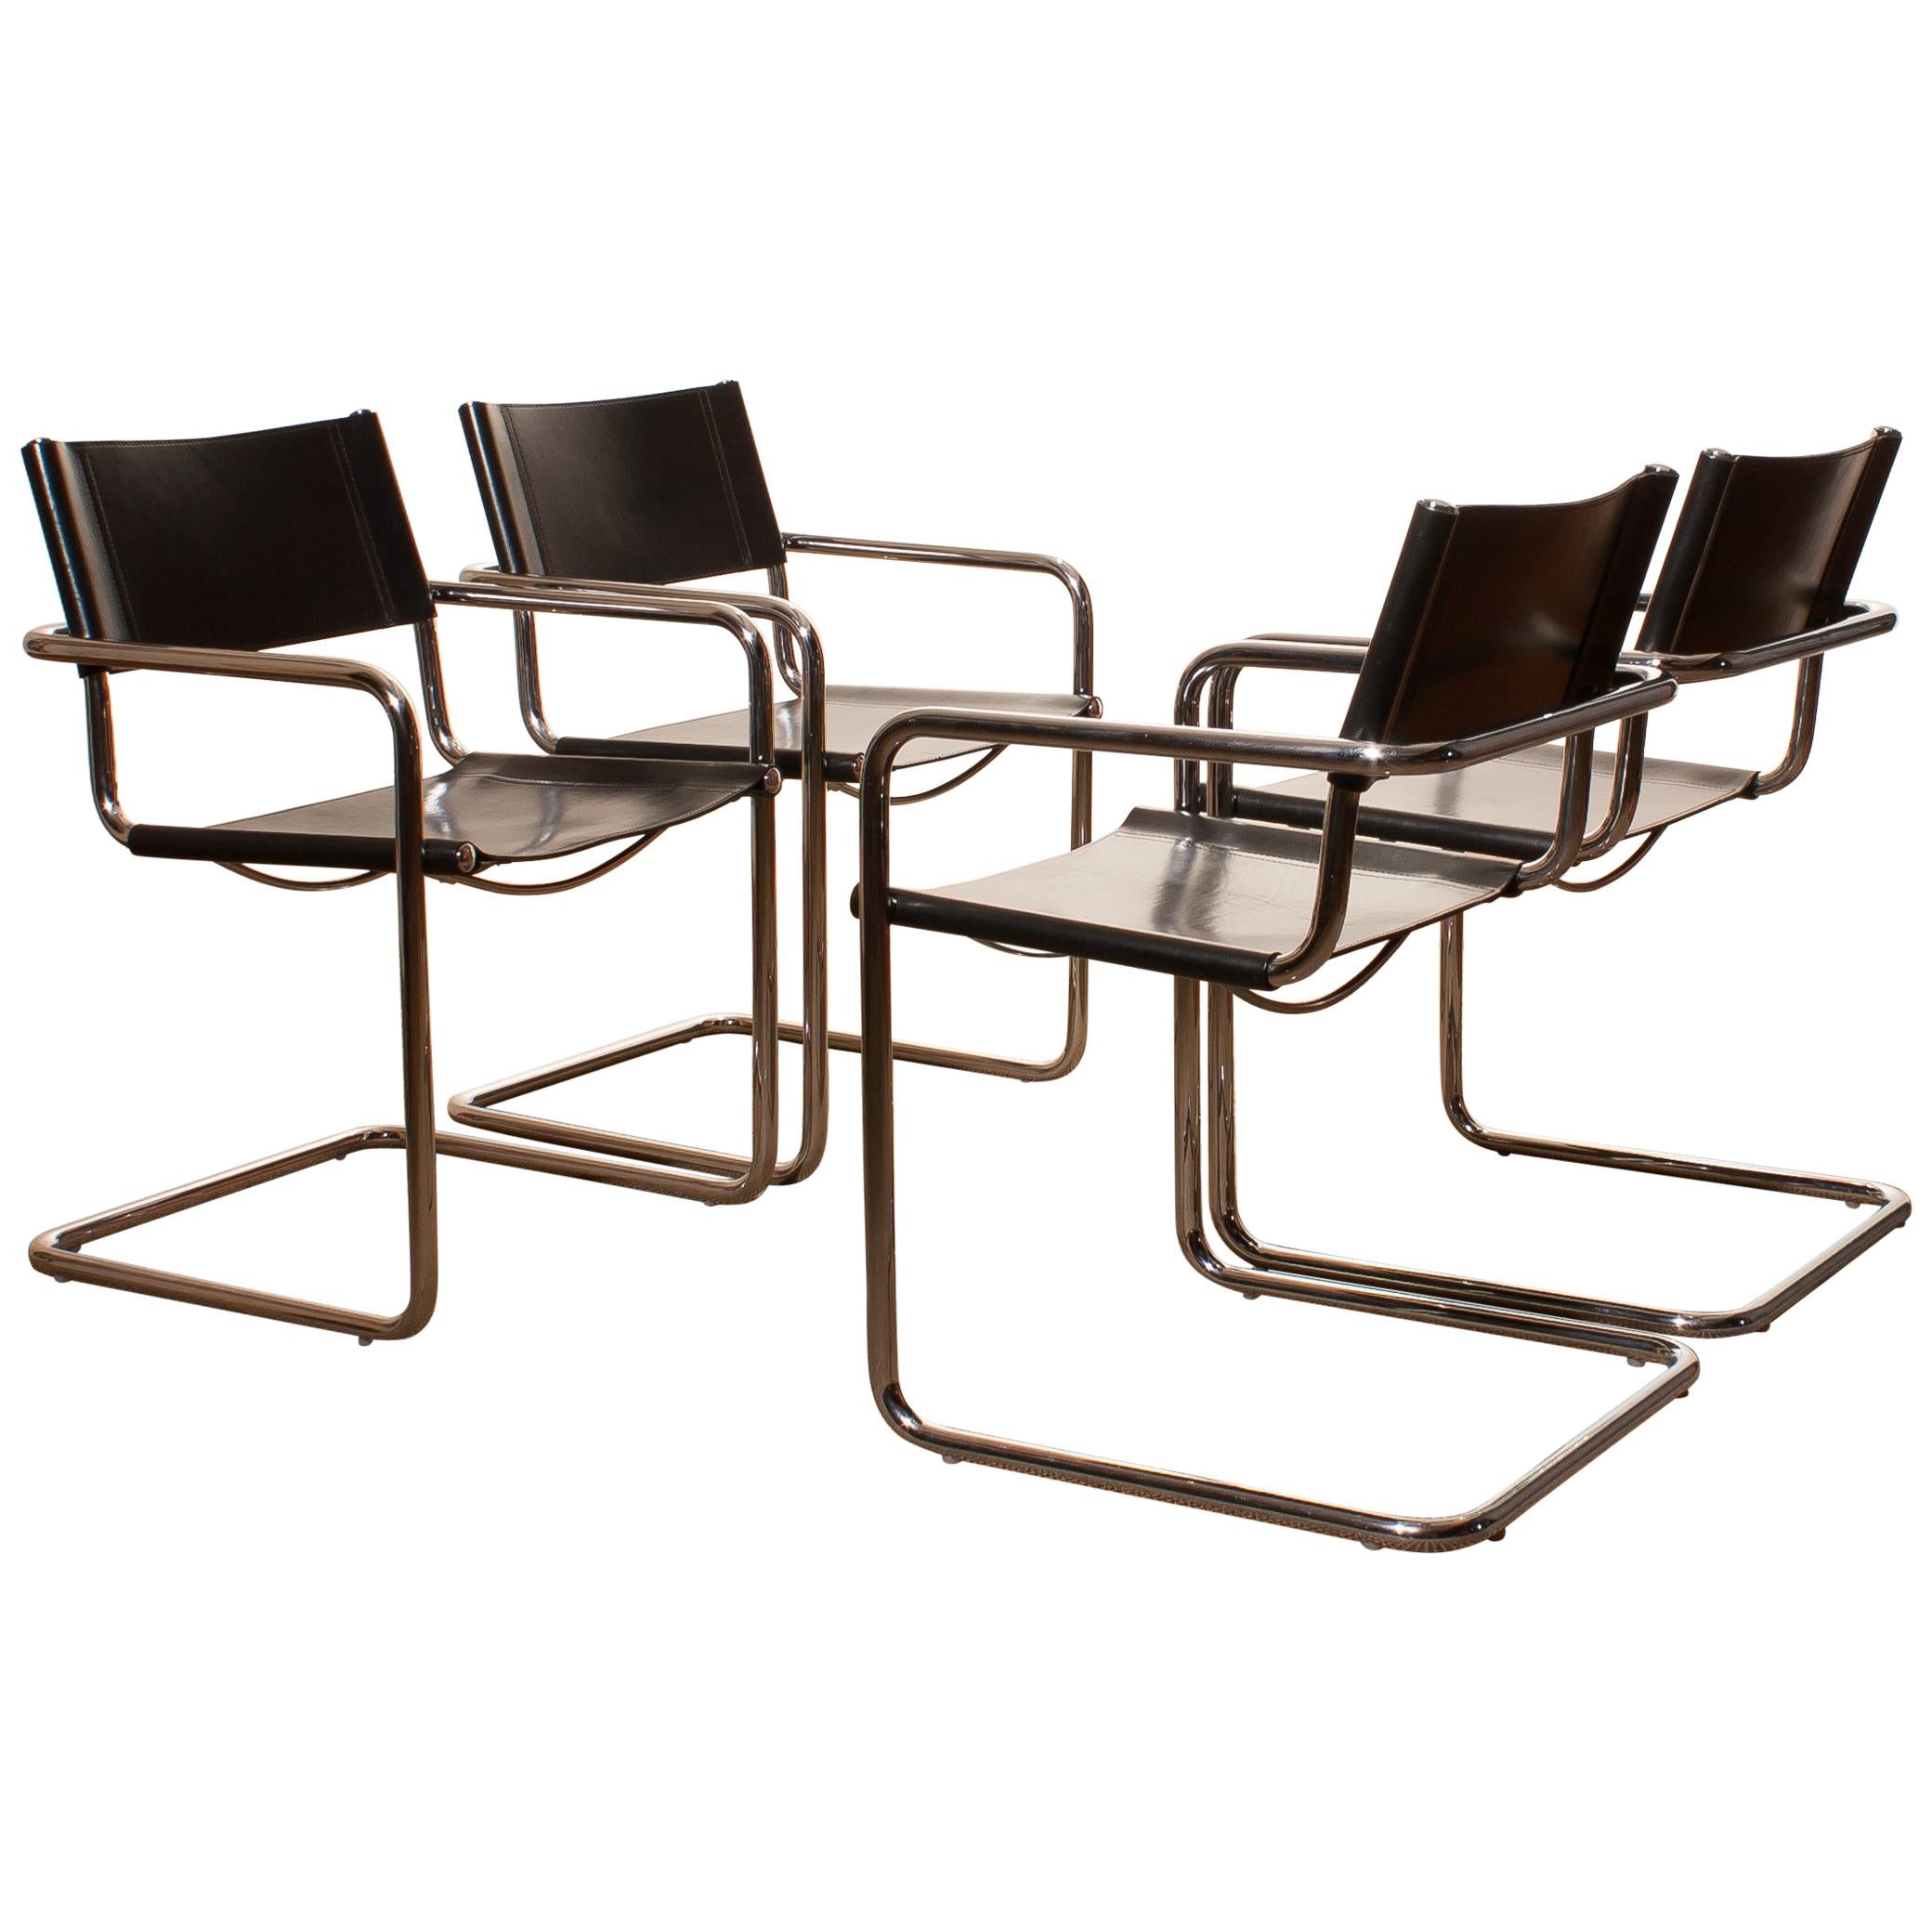 1970s, Tubular Steel and Sturdy Black Leather Dining Chairs by Matteo Grassi